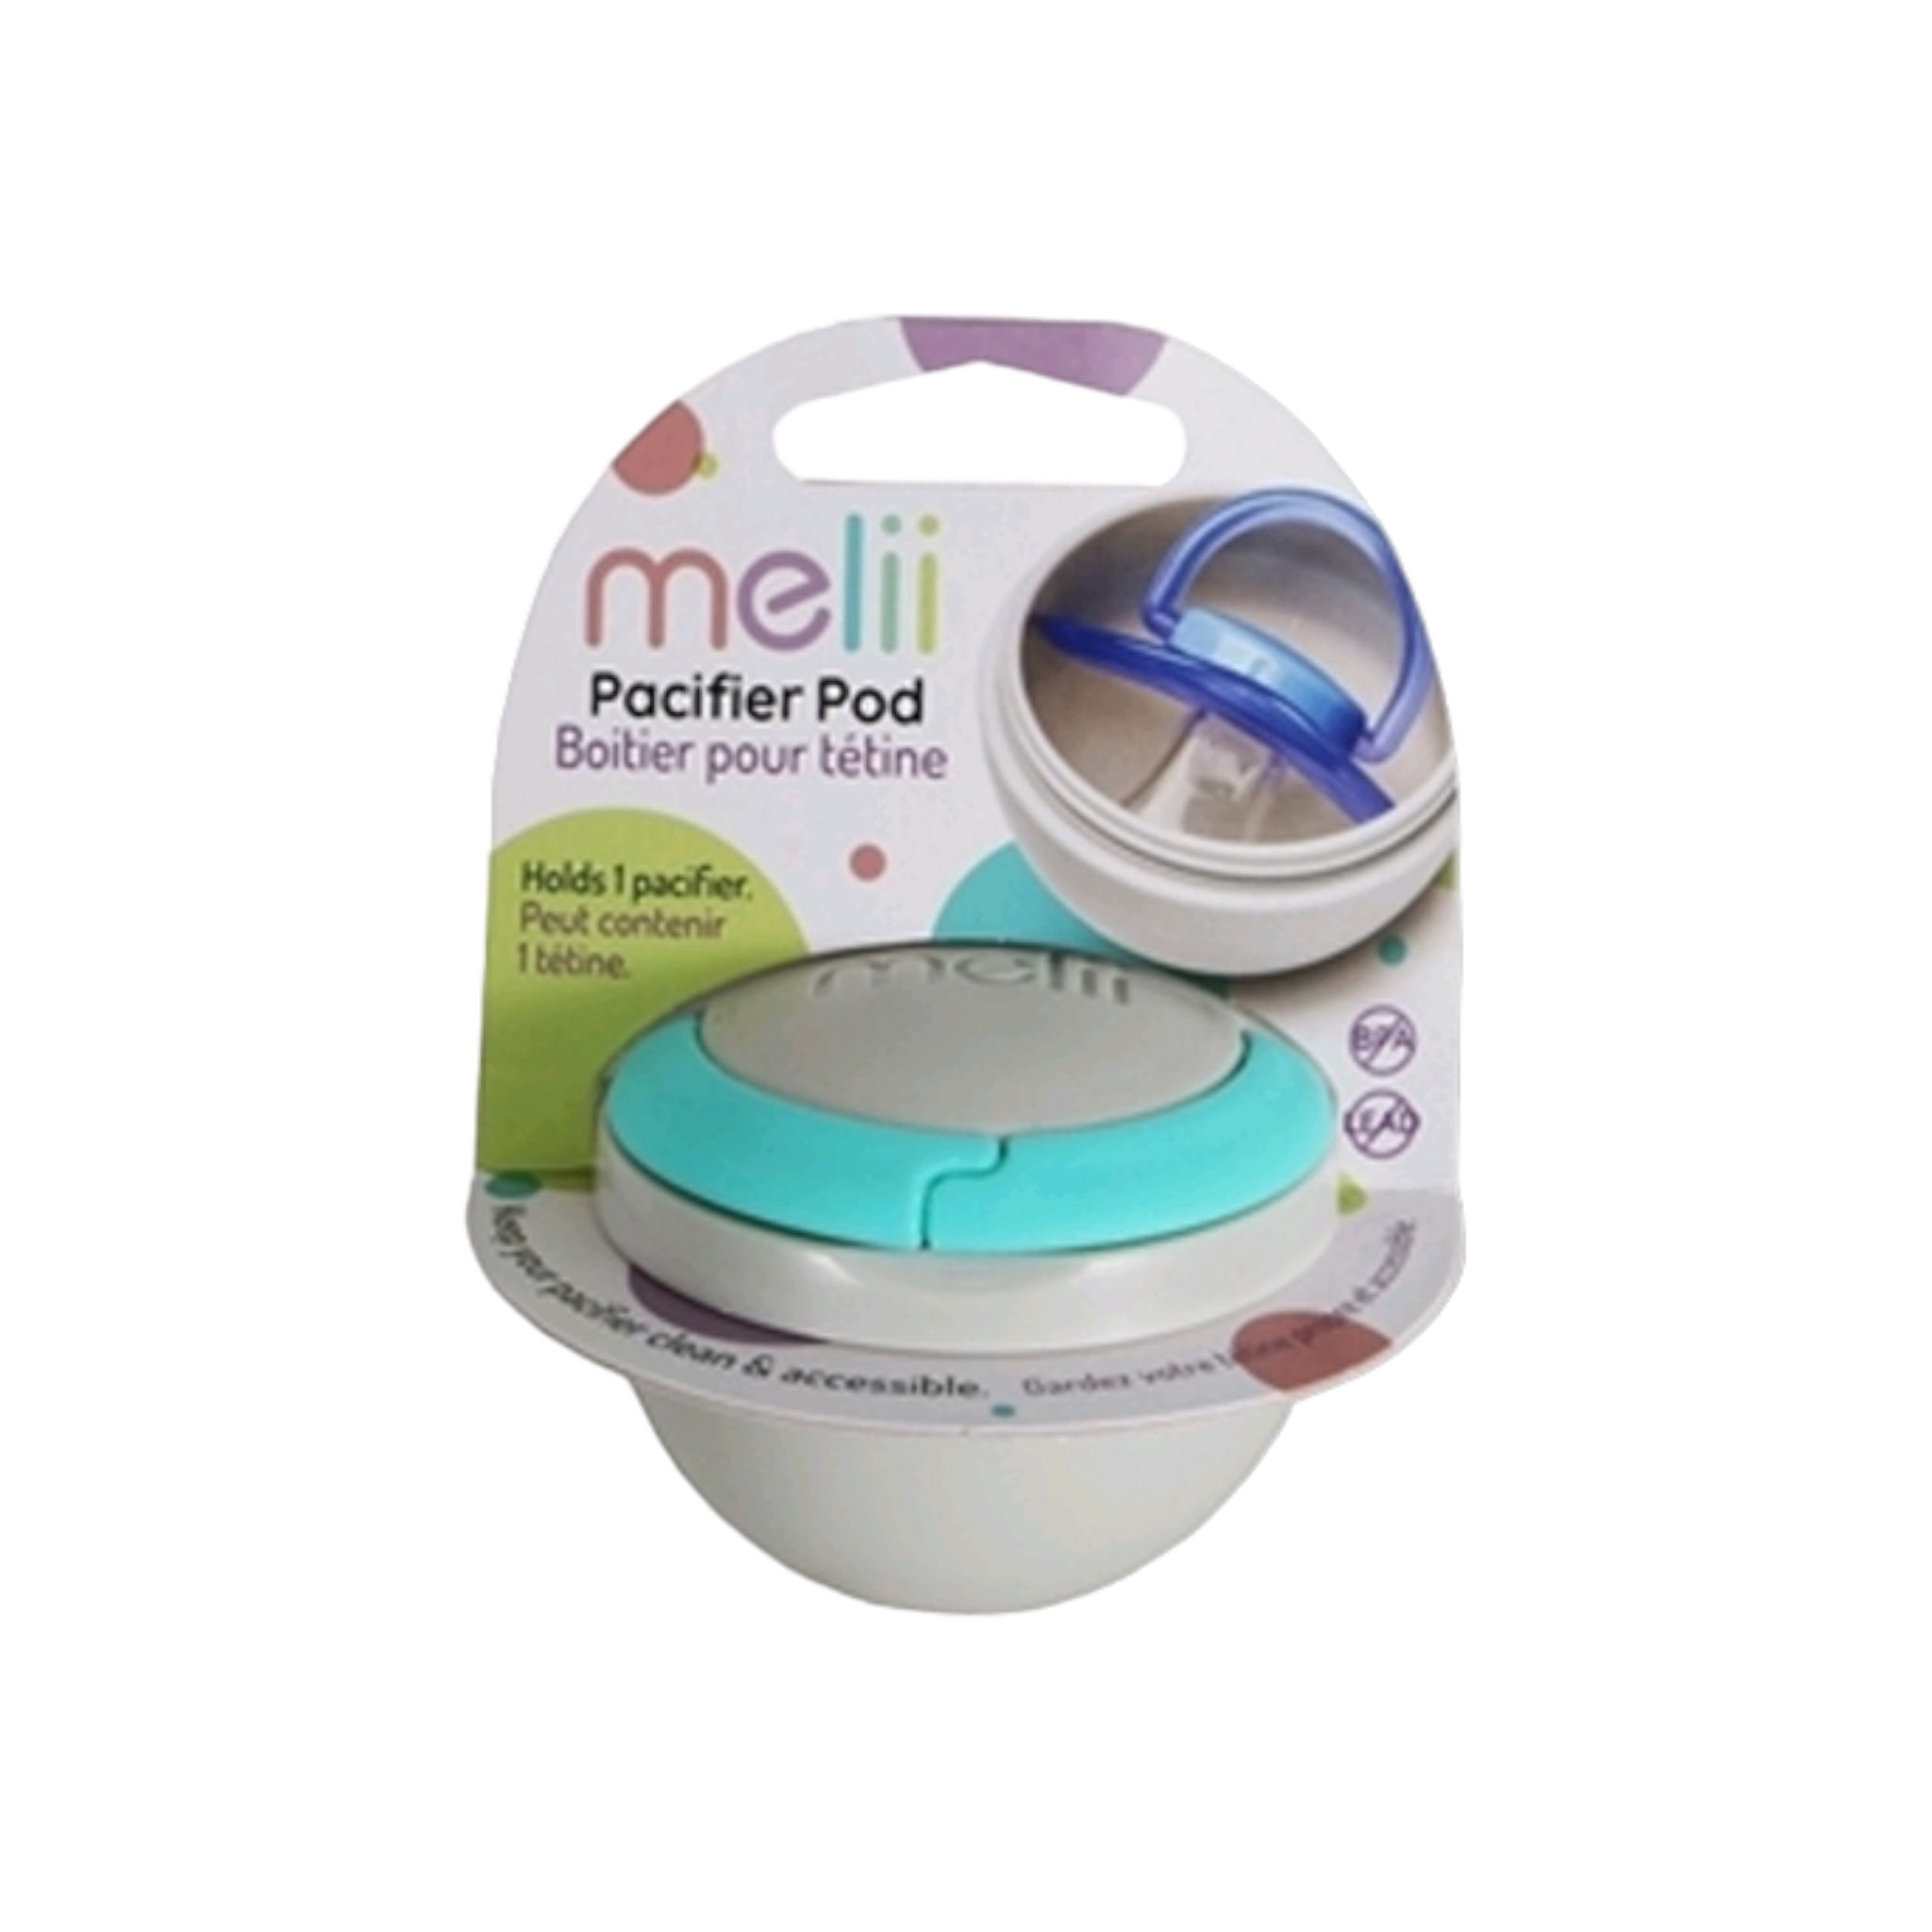 Melii Pacifier Pod Blue and Grey 15761